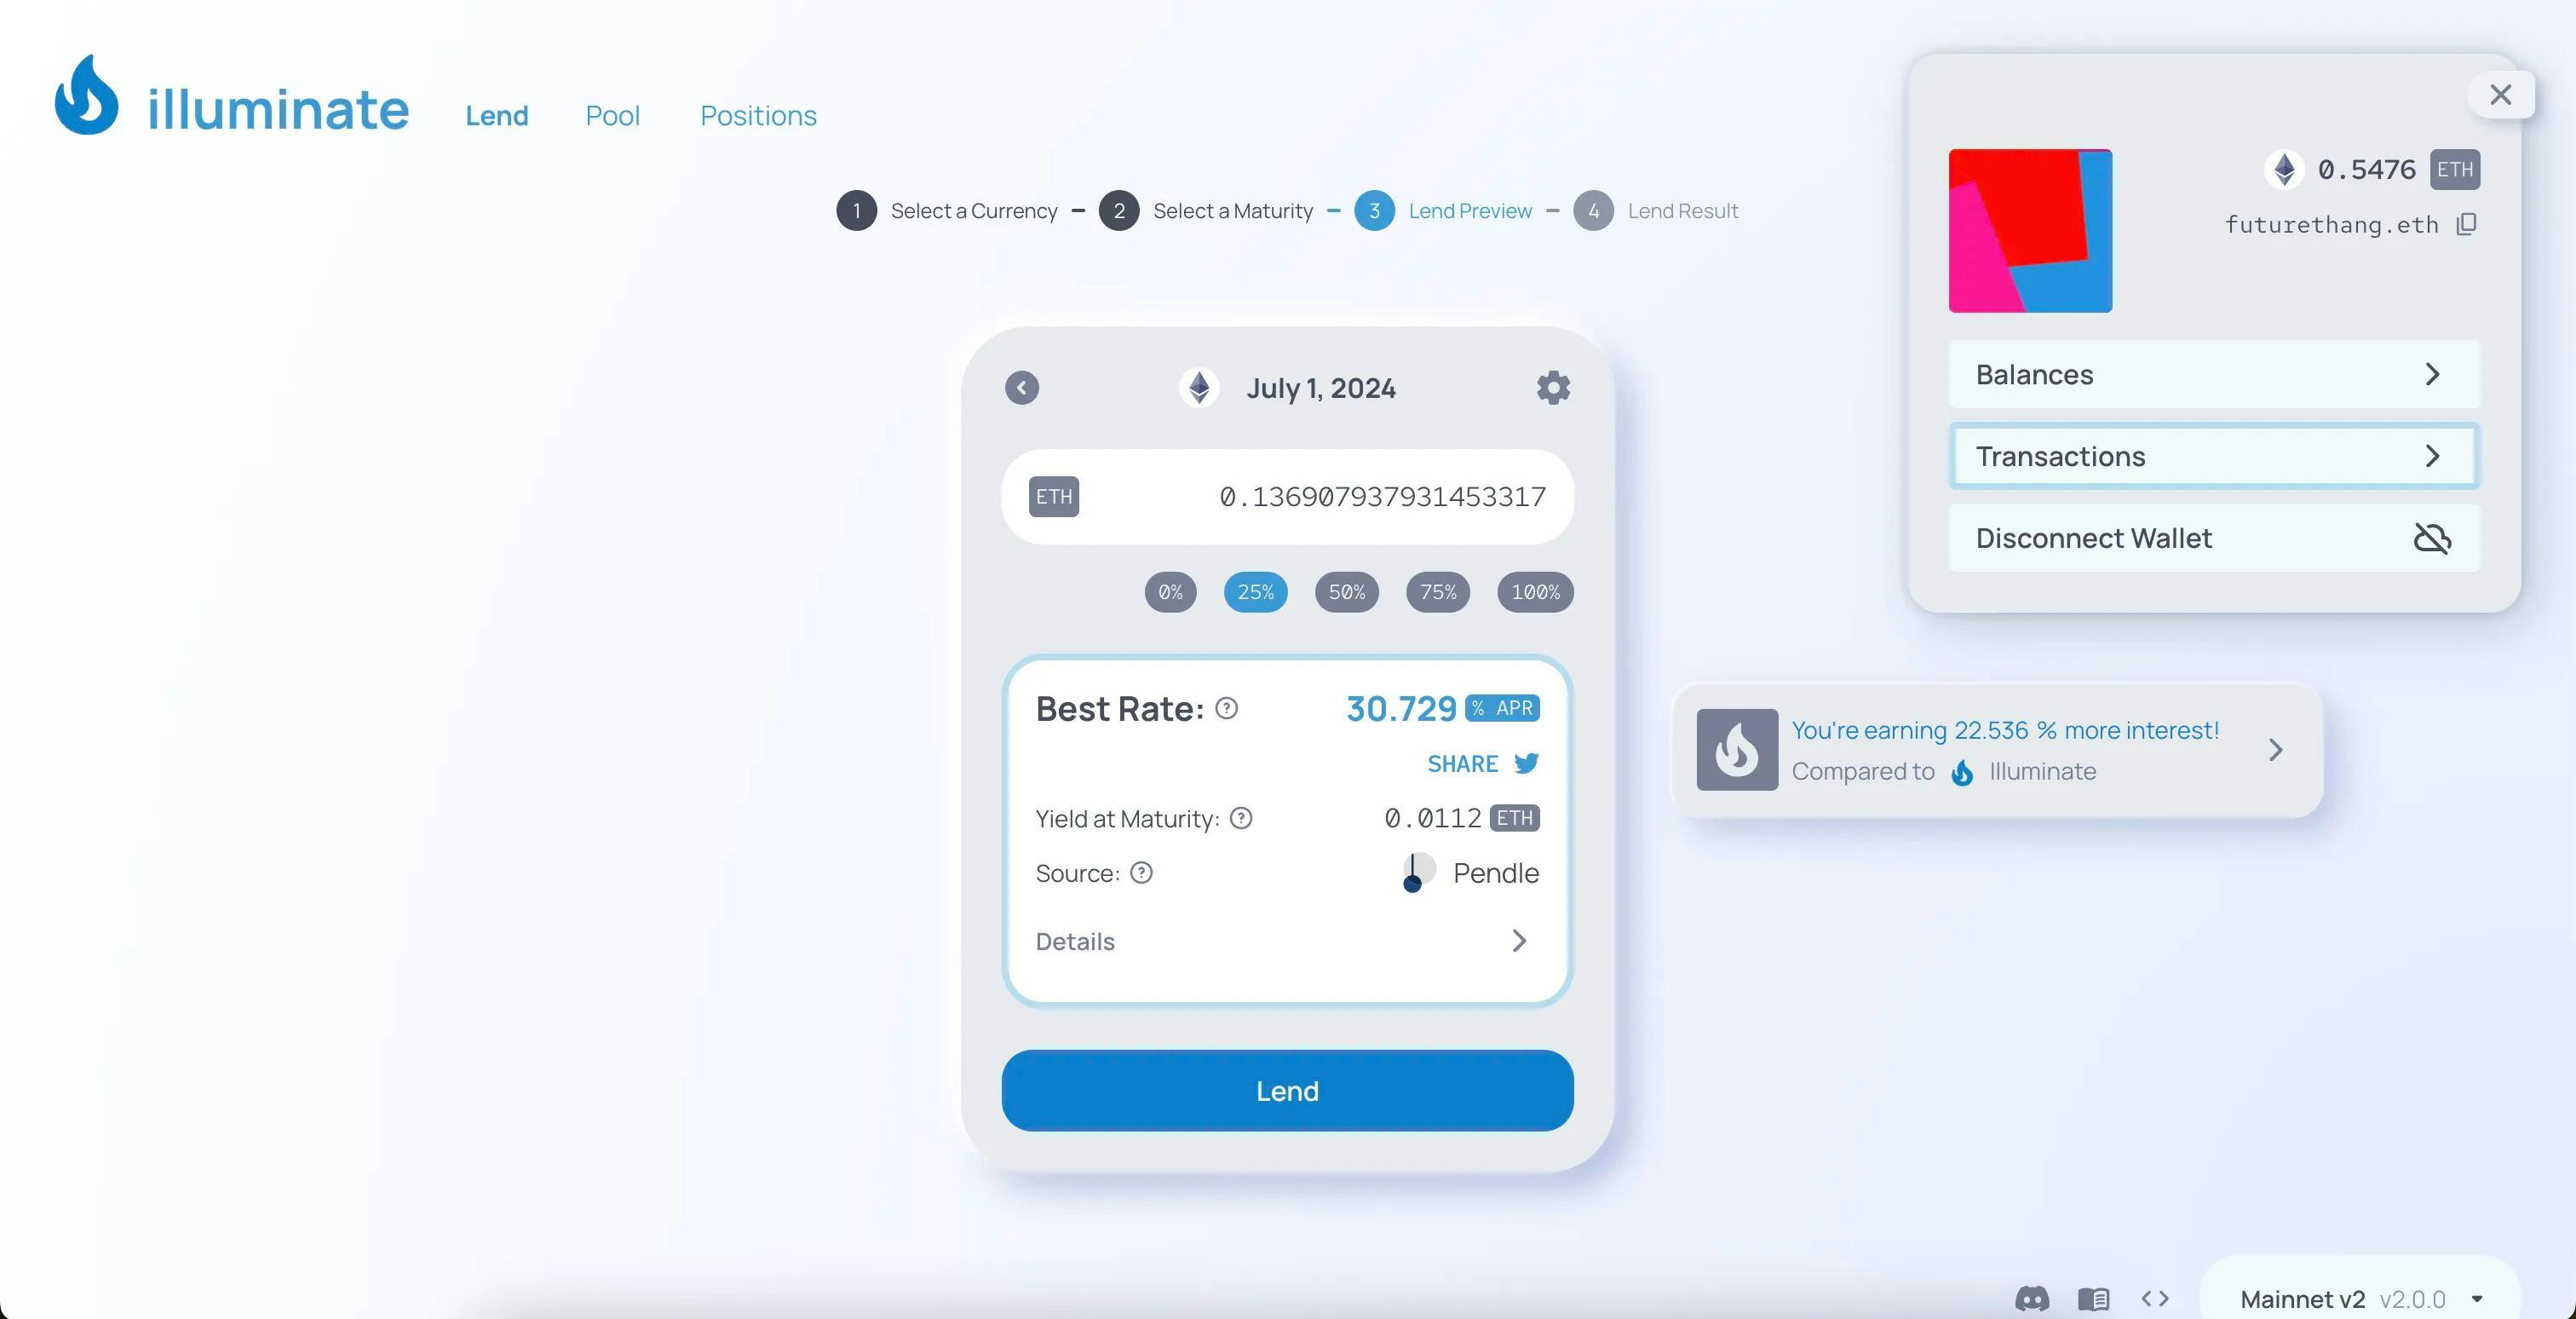 Wallet management allows view of transaction history, balances, and wallet operations.